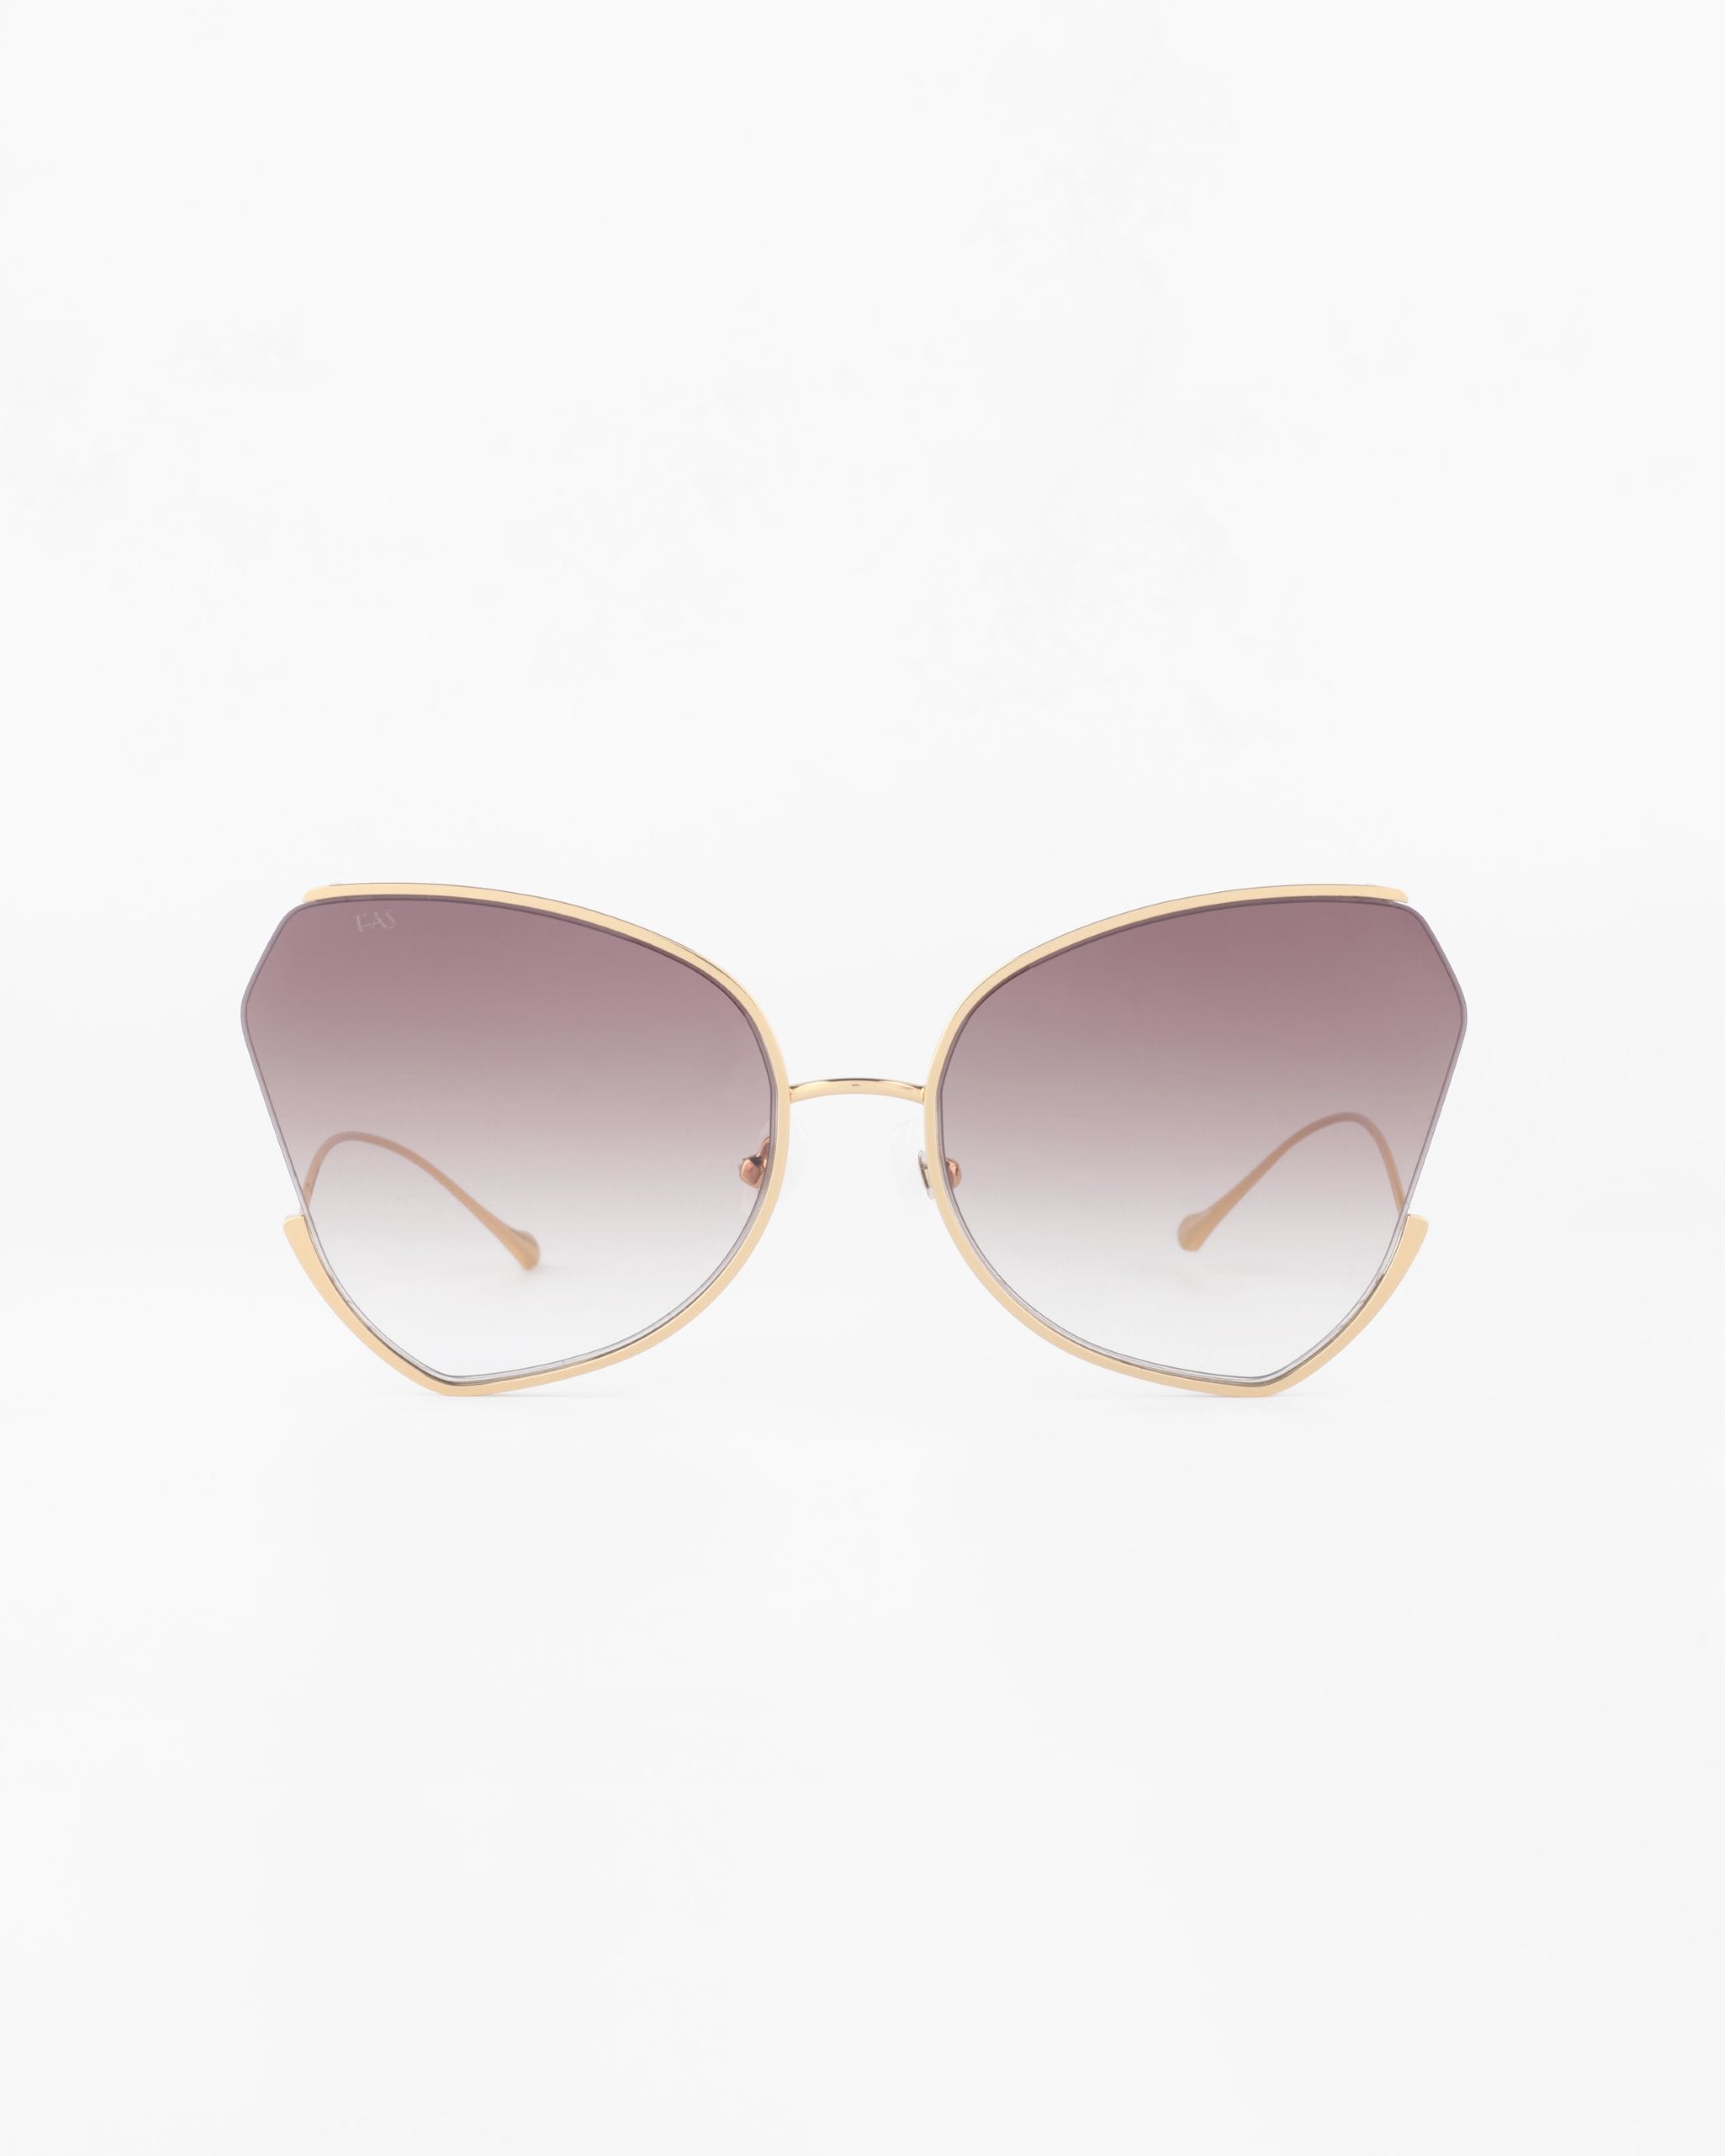 A pair of fashionable Watercolour sunglasses by For Art's Sake® with large, ombré lenses and thin, gold-plated stainless steel frames. The subtle cat-eye shape adds a stylish and retro flair to the design, while the butterfly silhouette brings an extra touch of elegance against a plain white background.